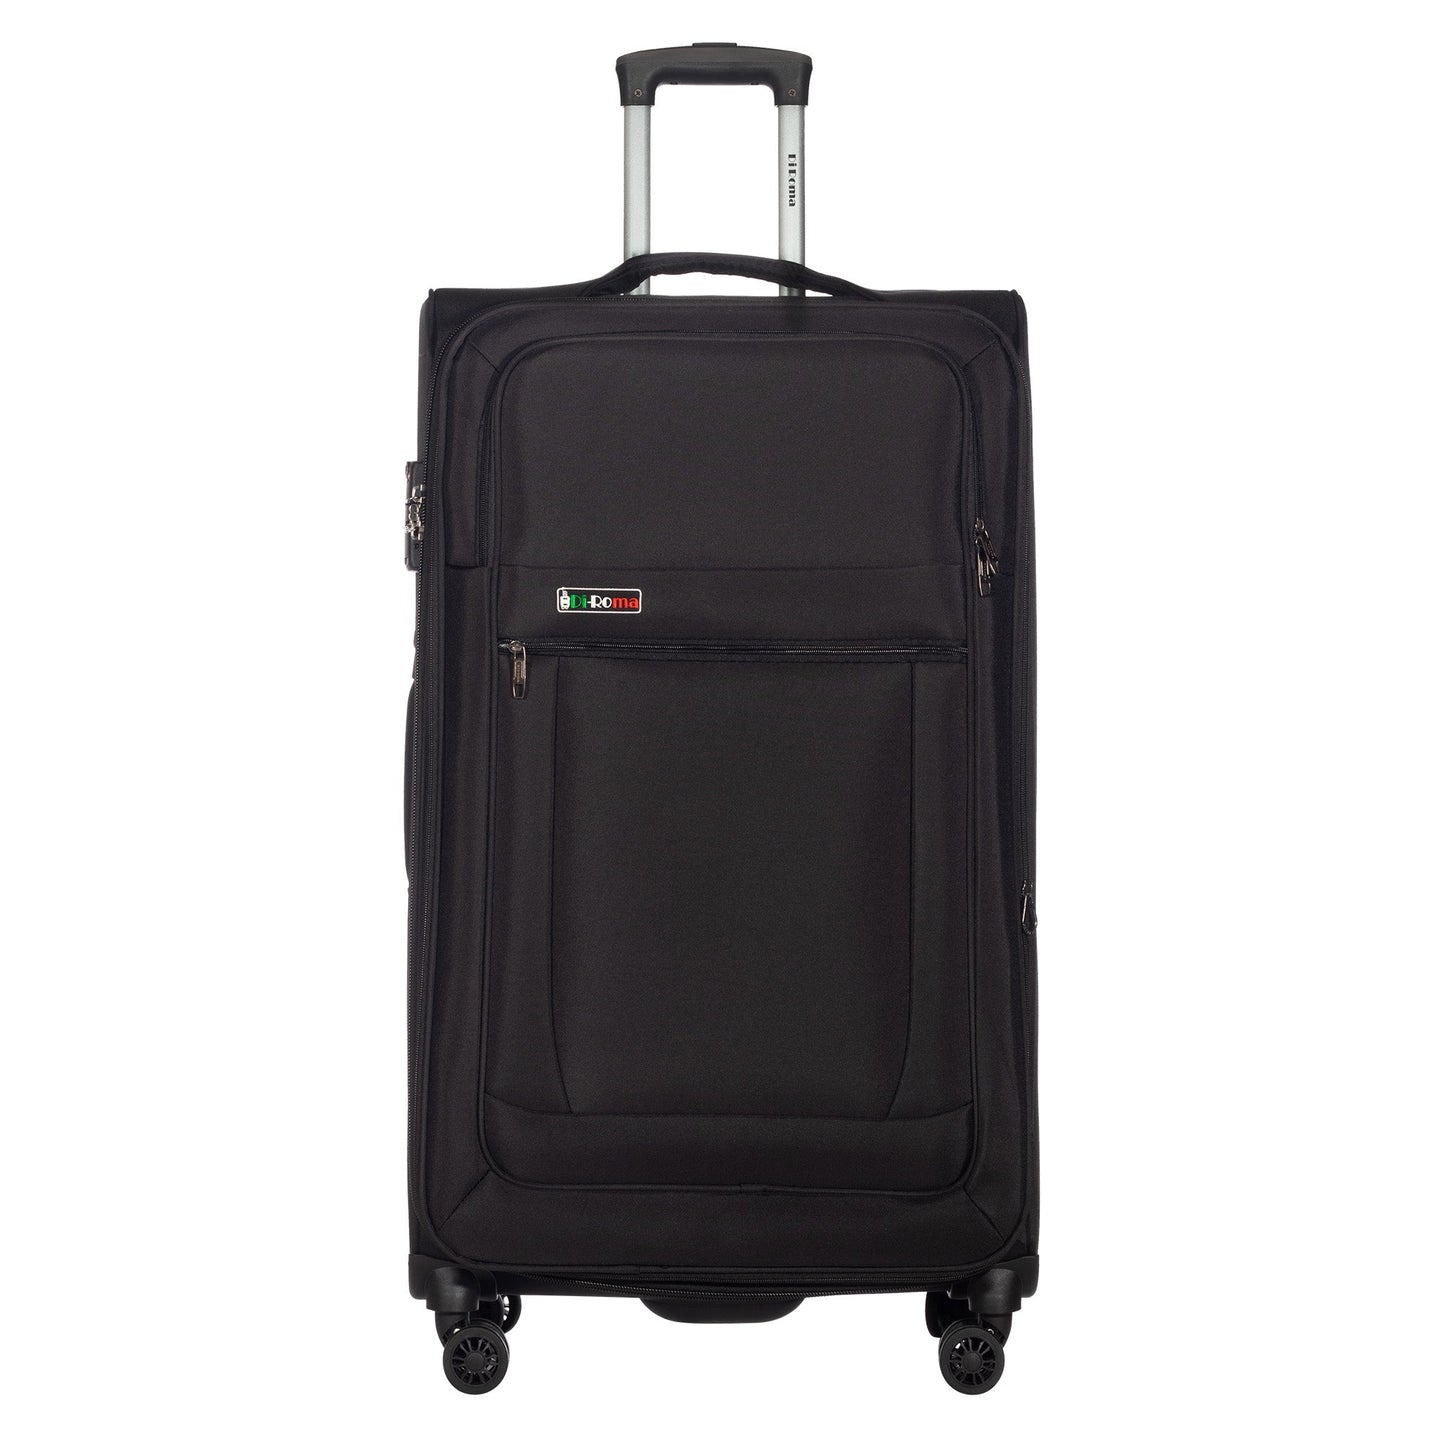 Luca Collection Black luggage Set 3pc(20/26/30") Suitcase